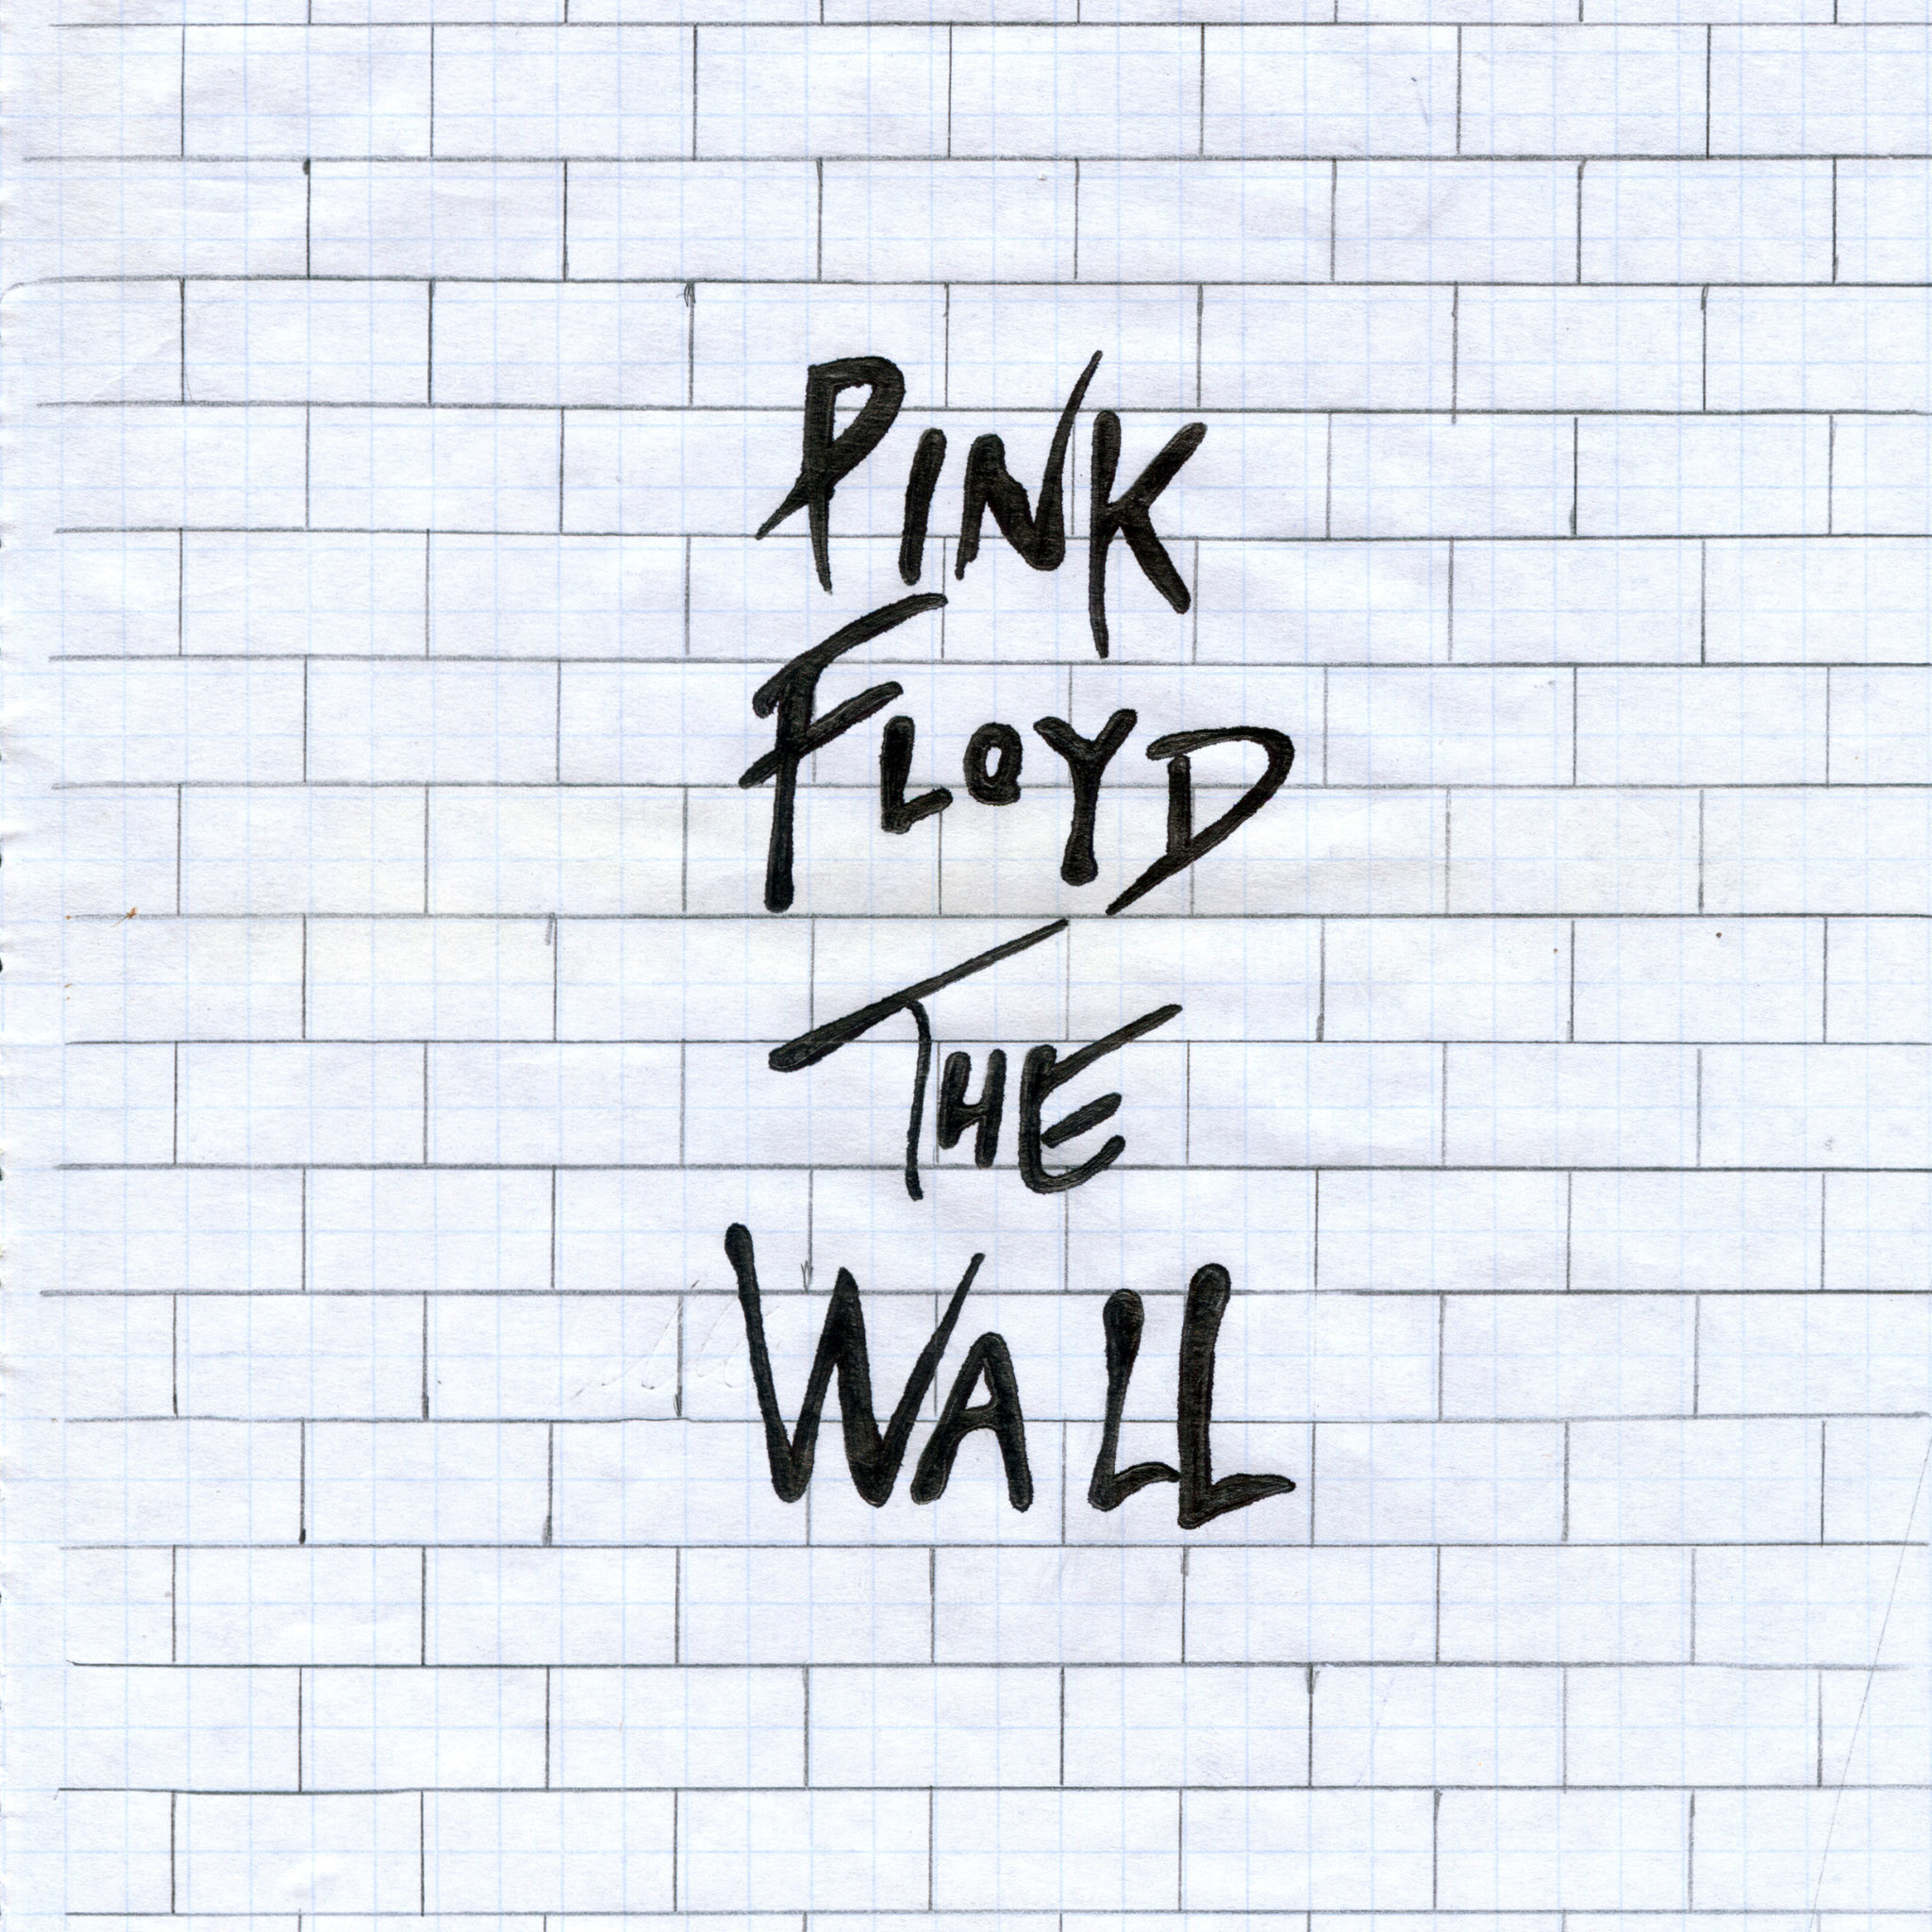 2048x2048 Wallpapers The Wall Pink Floyd - image #833260